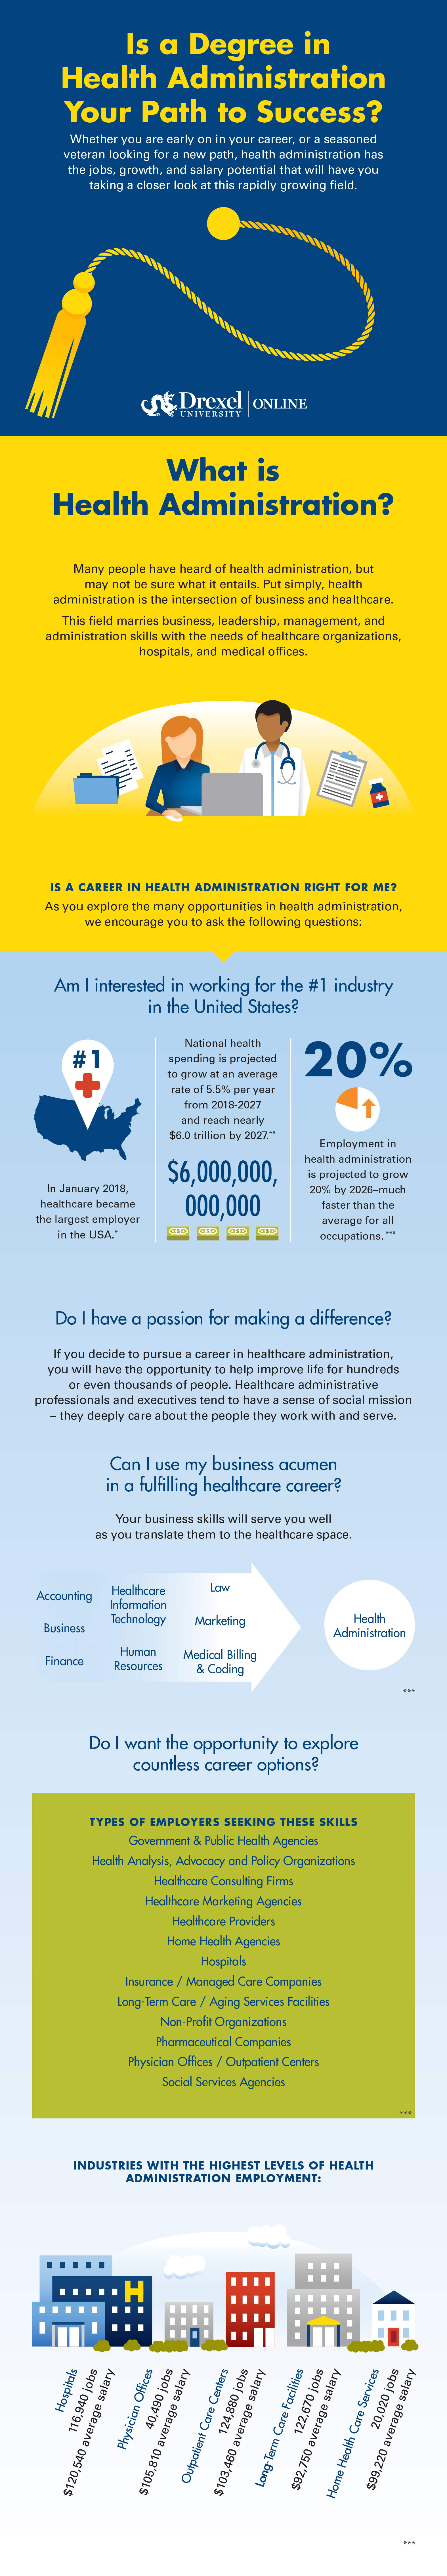 Infographic - Health Administration Careers